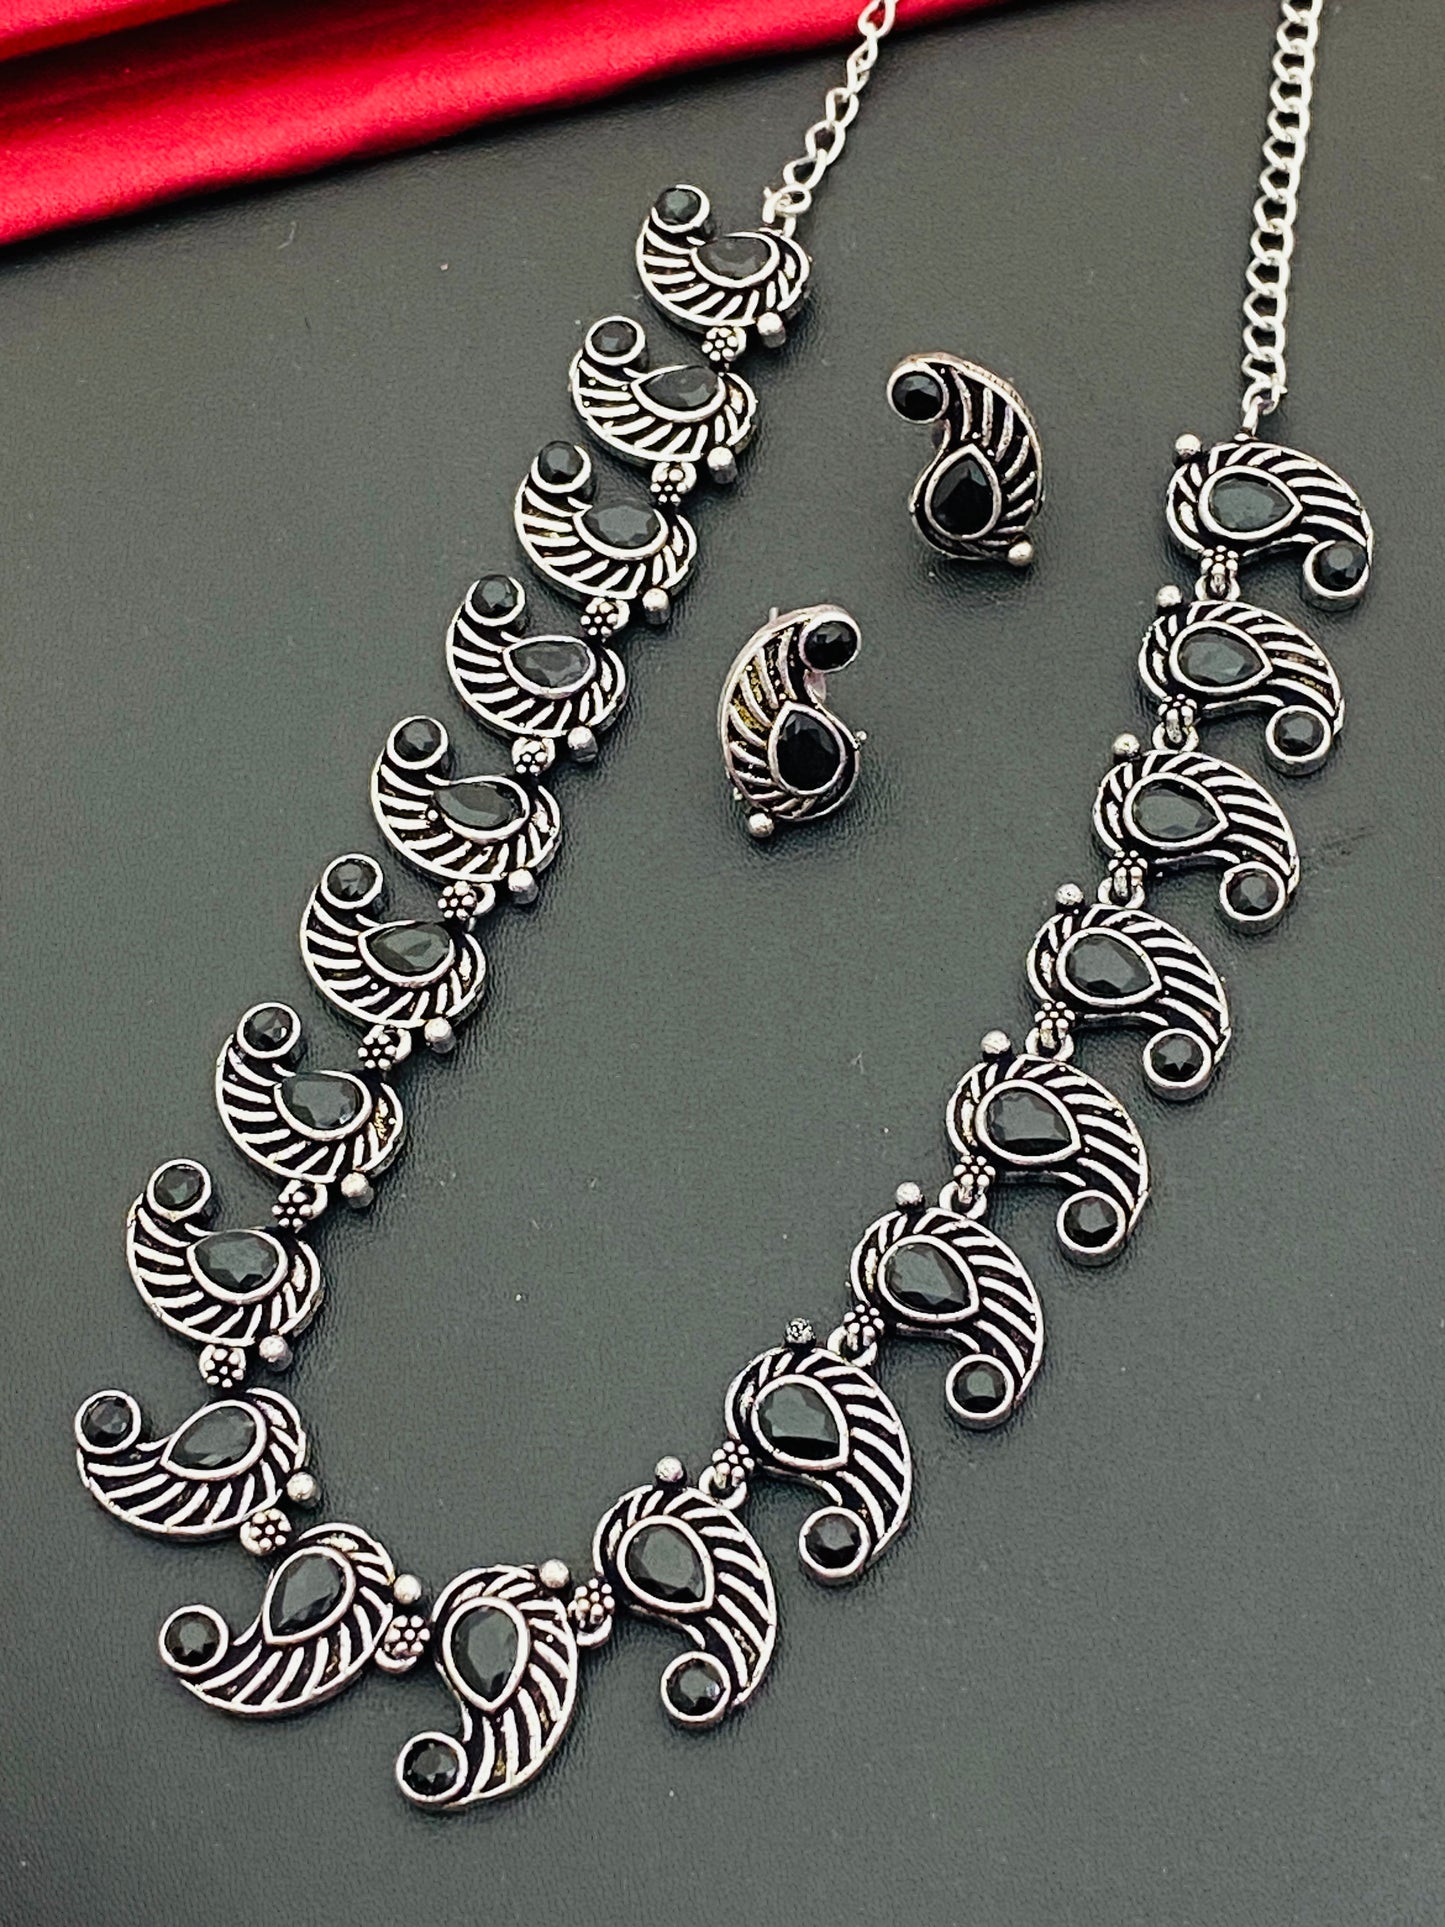 German Silver Plated Oxidized Necklace Set With Earrings in Litchfield Park